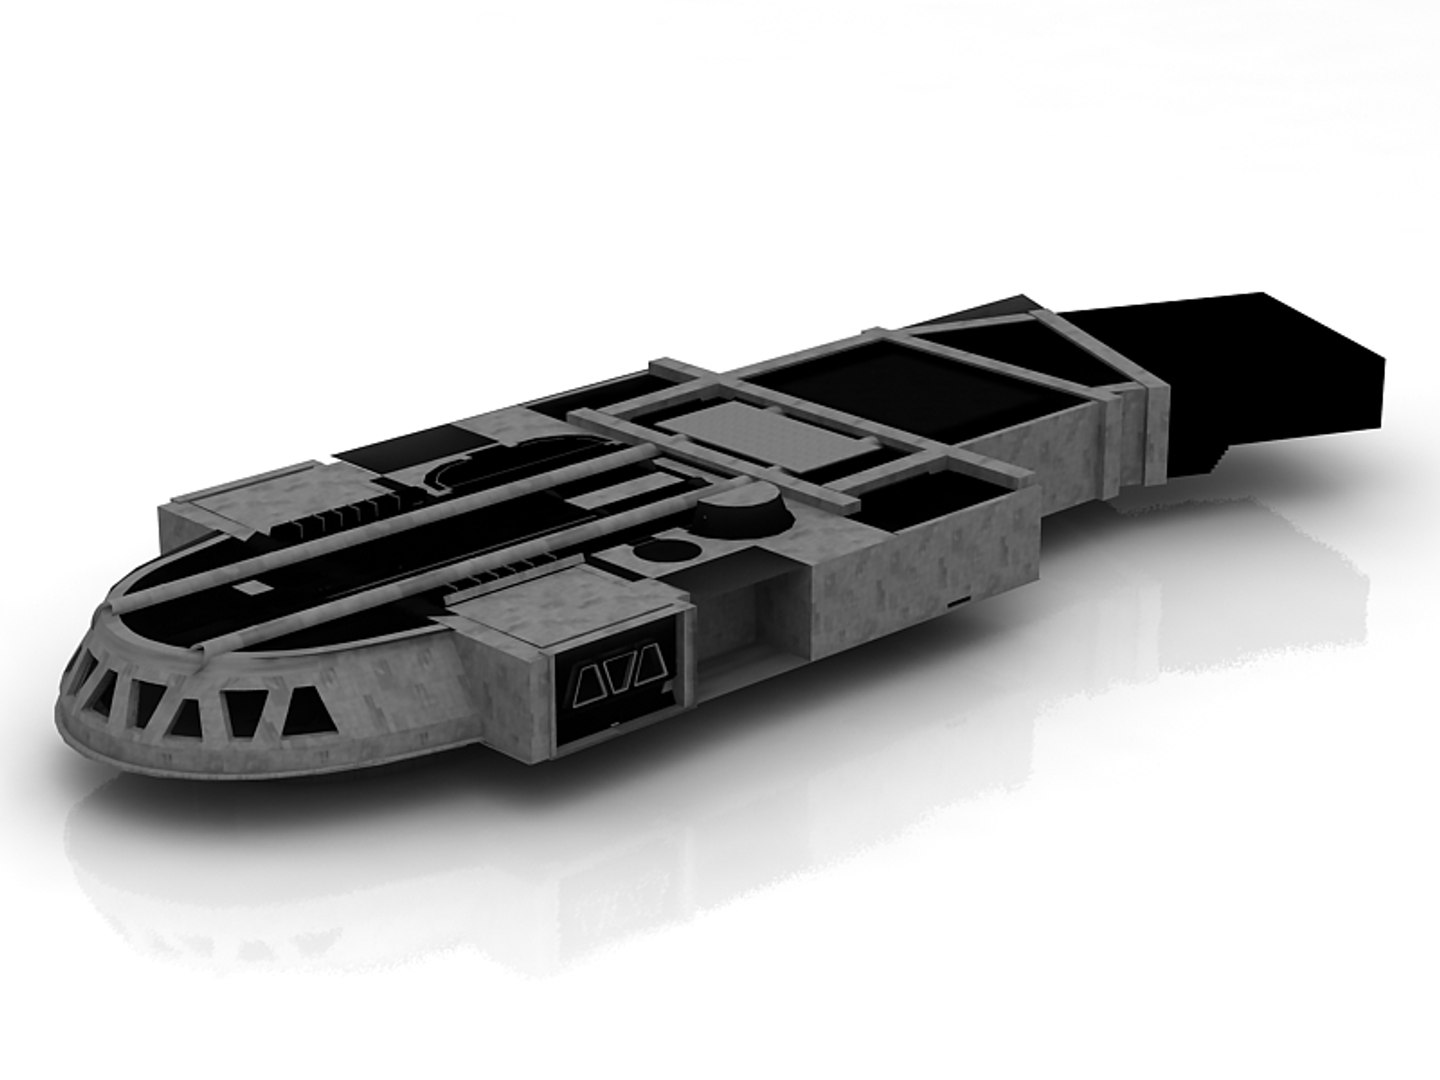 3D model star destroyer spaceship imperial https://p.turbosquid.com/ts-thumb/I2/nROvOc/ugtaafQ7/imperialstardestroyer/jpg/1600770736/1920x1080/fit_q87/c732cce15be9435247ce99206fdfaf8f2a99205a/imperialstardestroyer.jpg